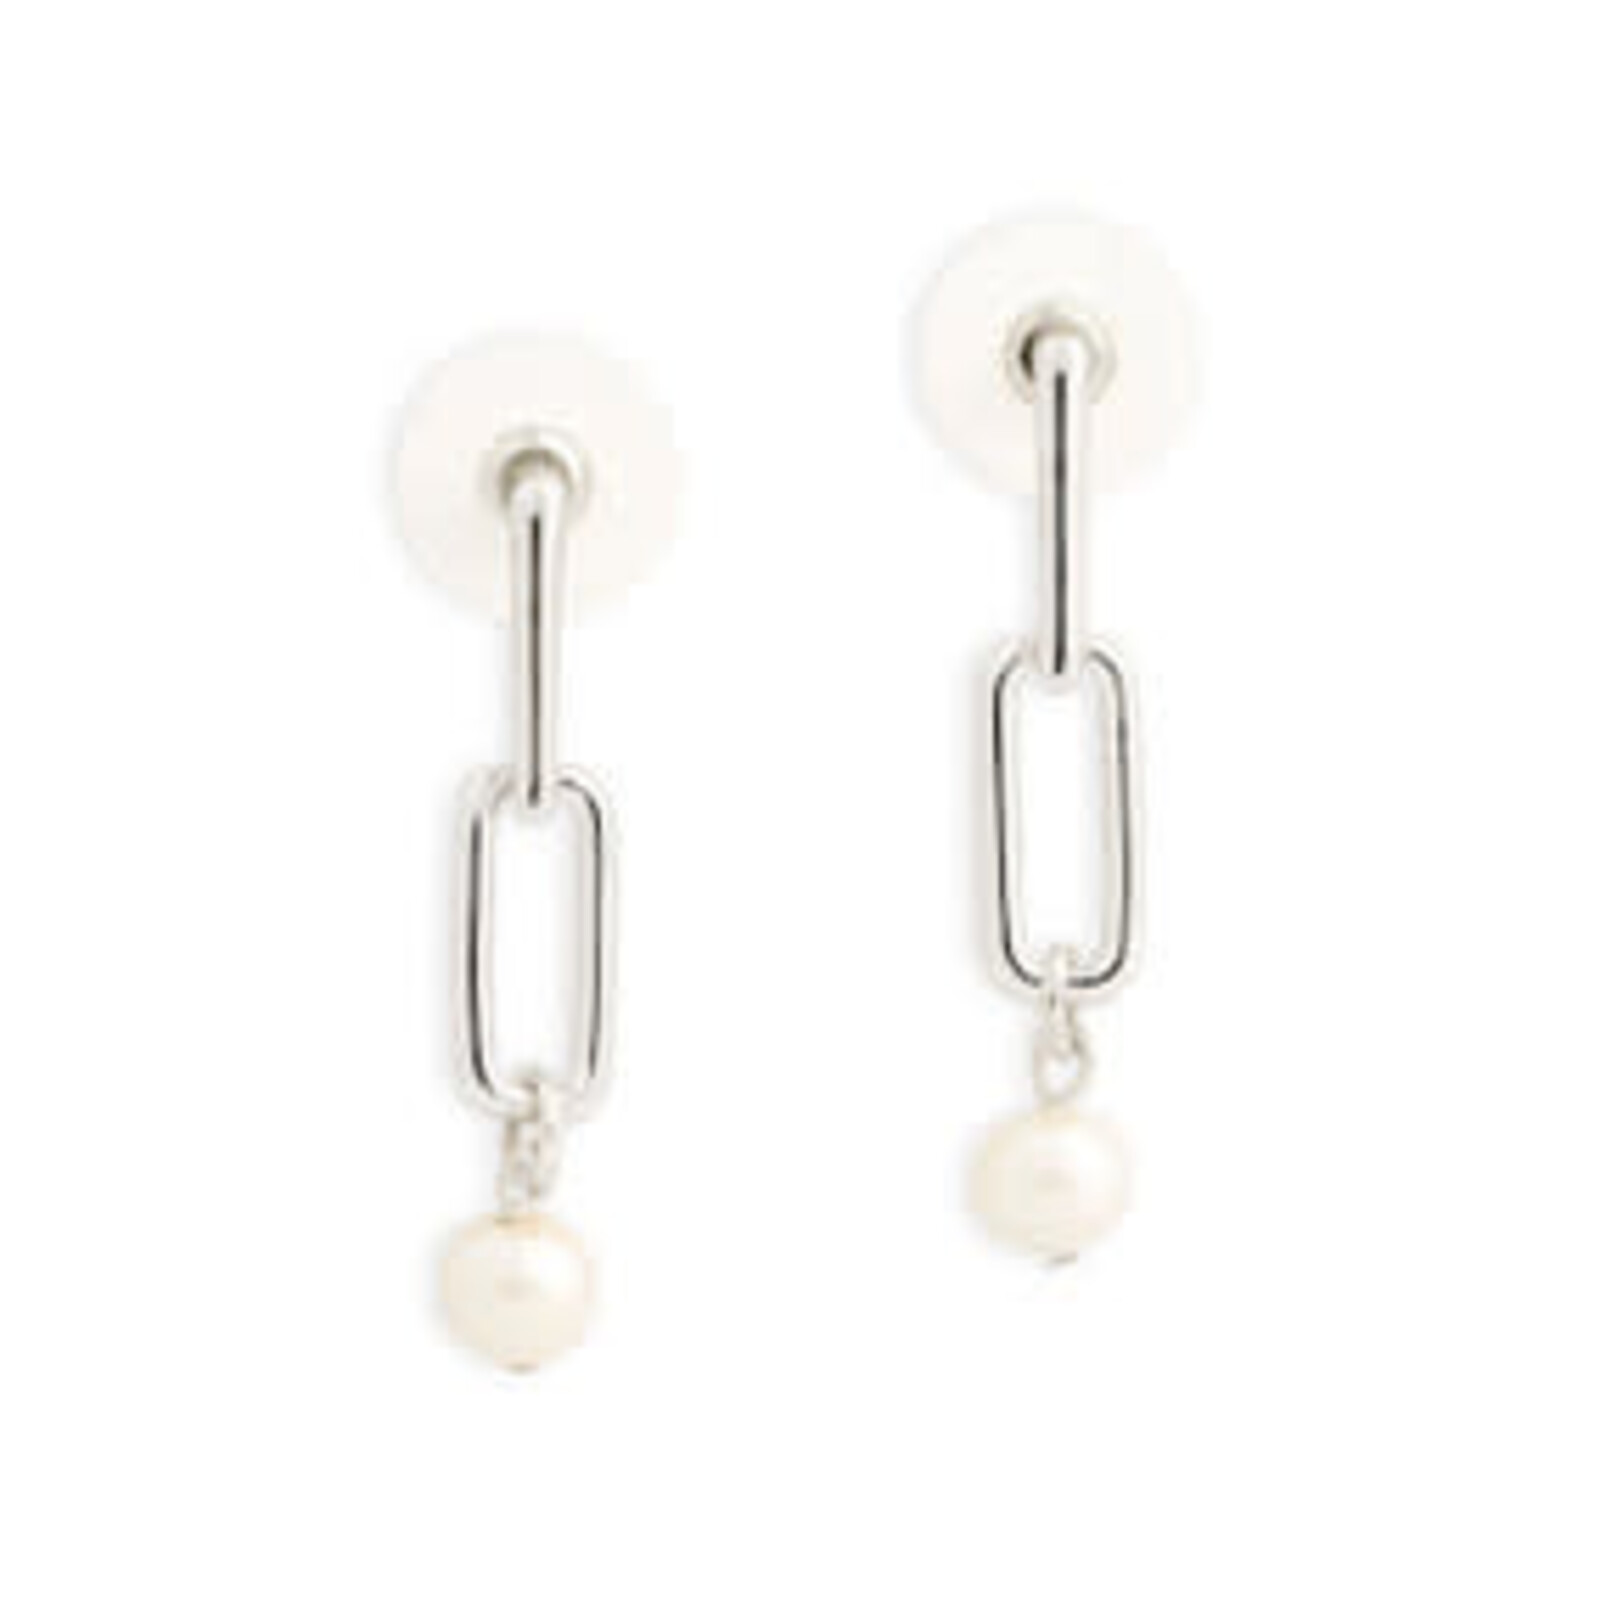 Demdaco Pearls From Within Earrings - Silver   1004130357 loading=